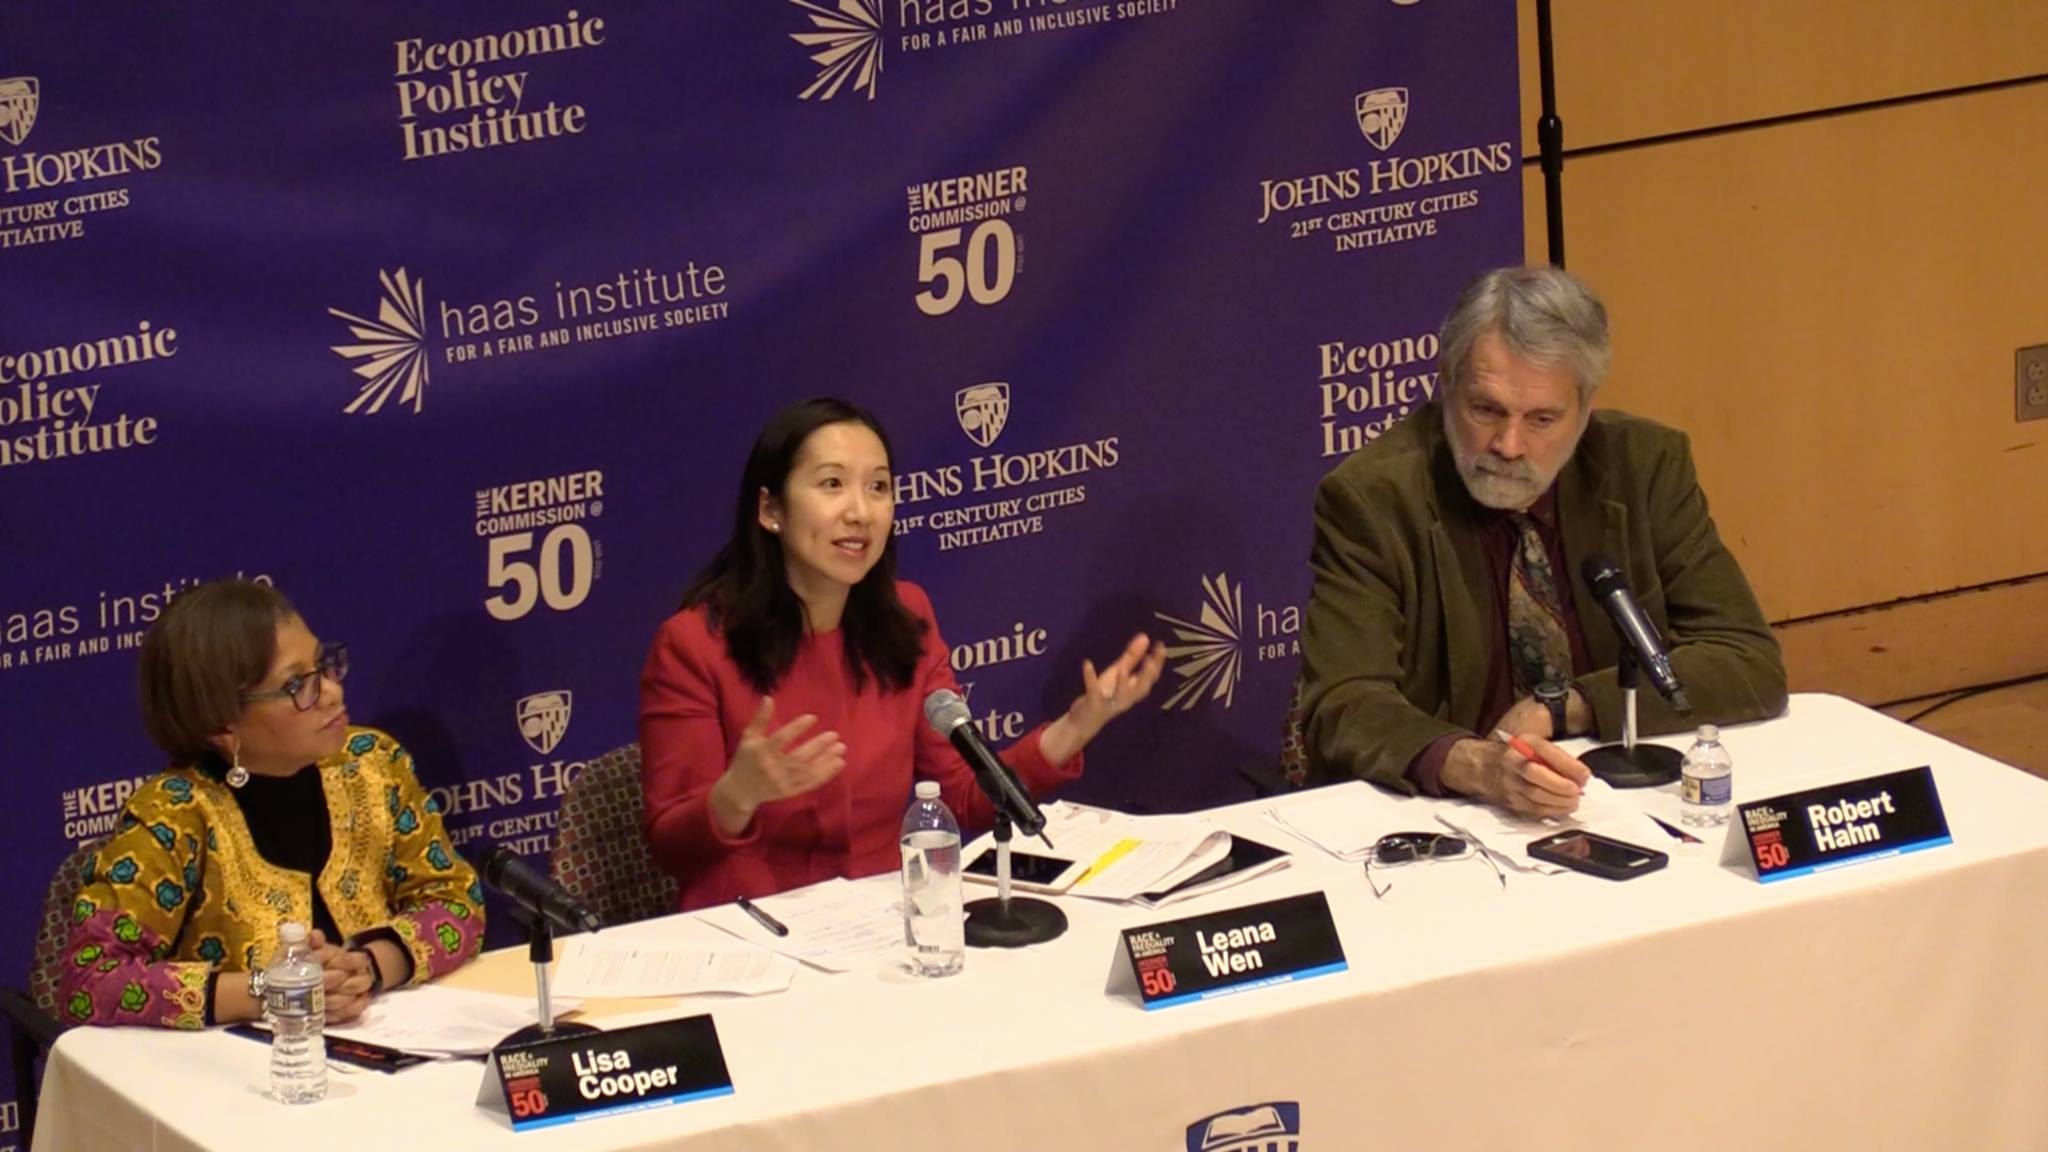 Lisa Cooper, Leana Wen, and Robert Hahn discussing health and race in America